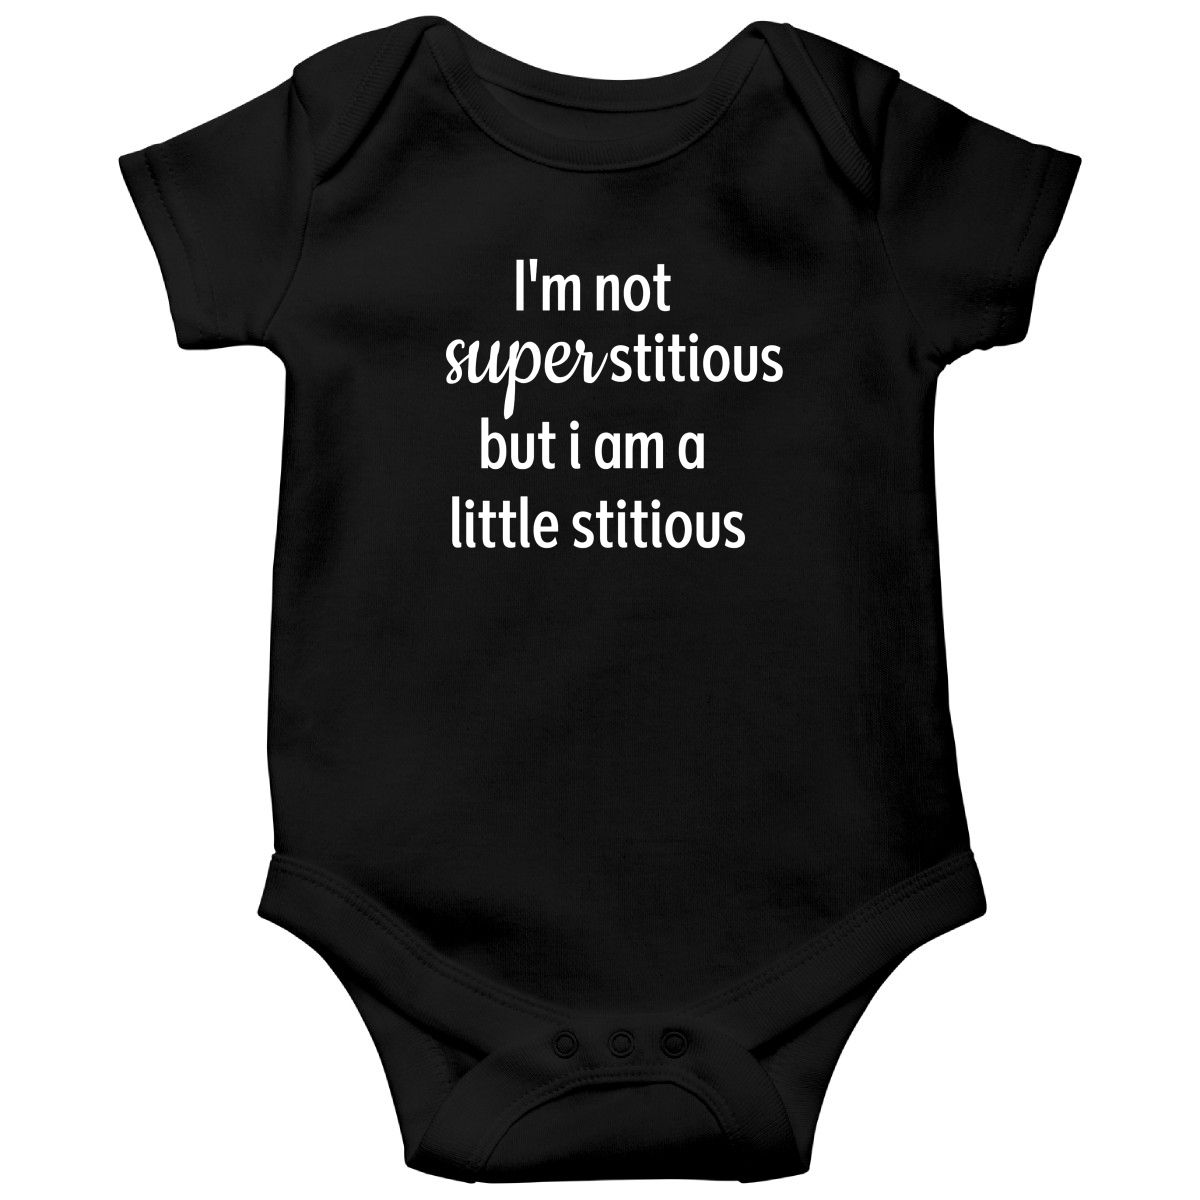 I'm Not Superstitious but I am a Little Stitious Baby Bodysuits | Black